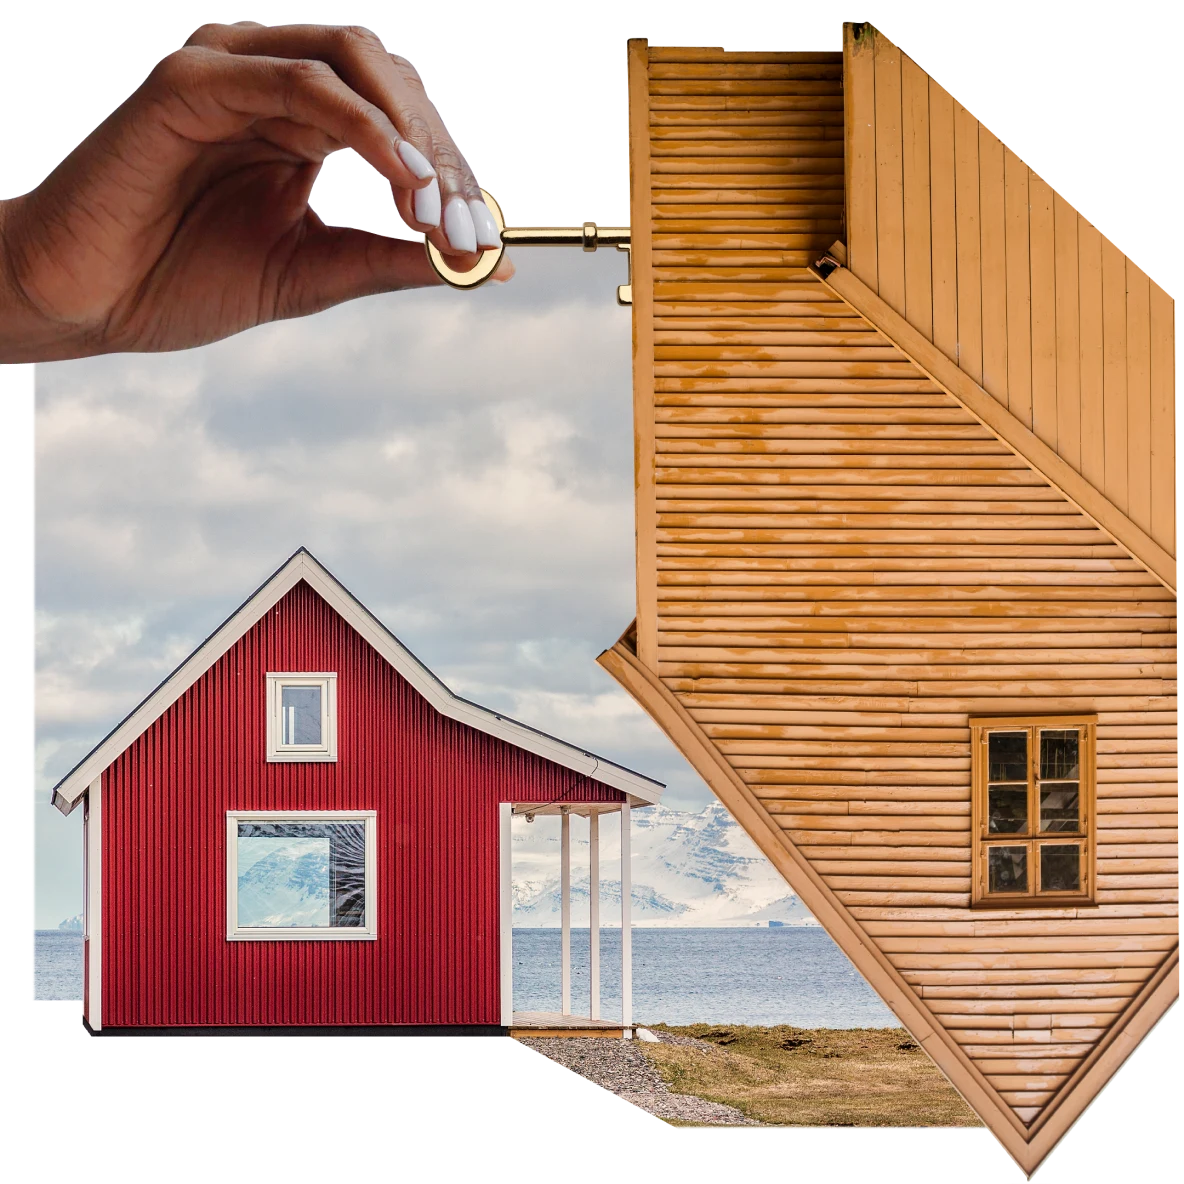 Collage of property themes. A Black hand turns the key to an upside-down wooden house. A red A-frame house with a porch in the background is next to a lake, with snowy mountains and blue sky in the distance. 